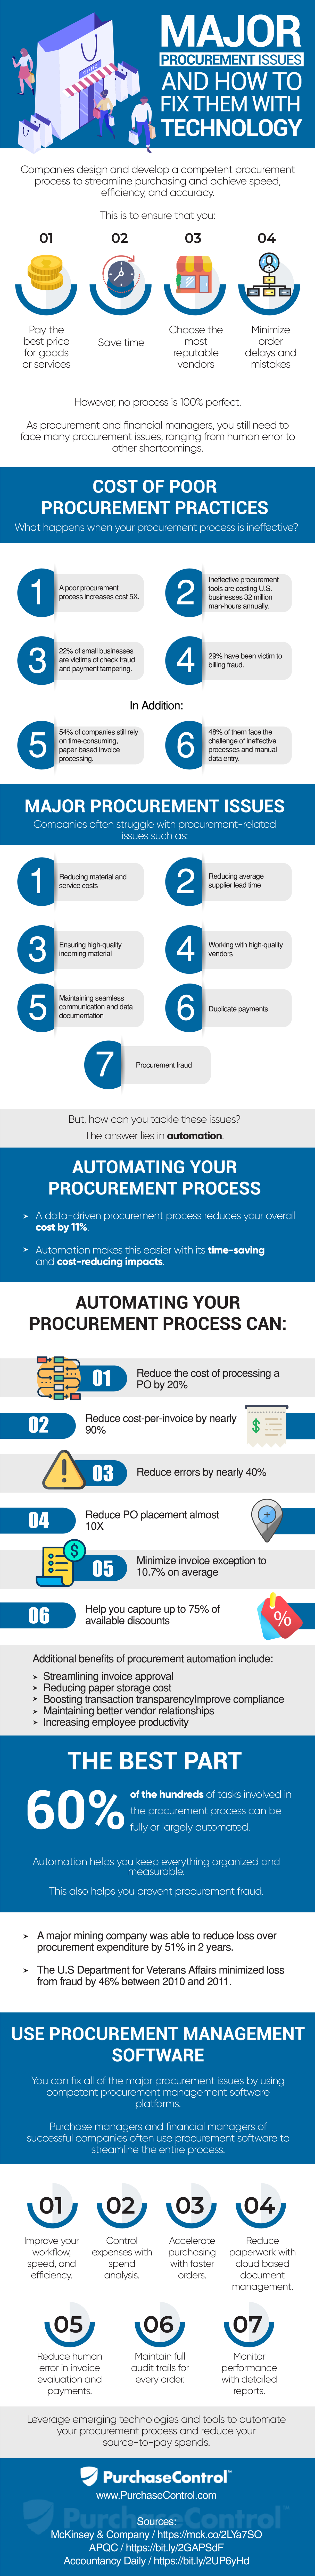 Major Procurement Issues And How To Fix Them With Technology Infographic